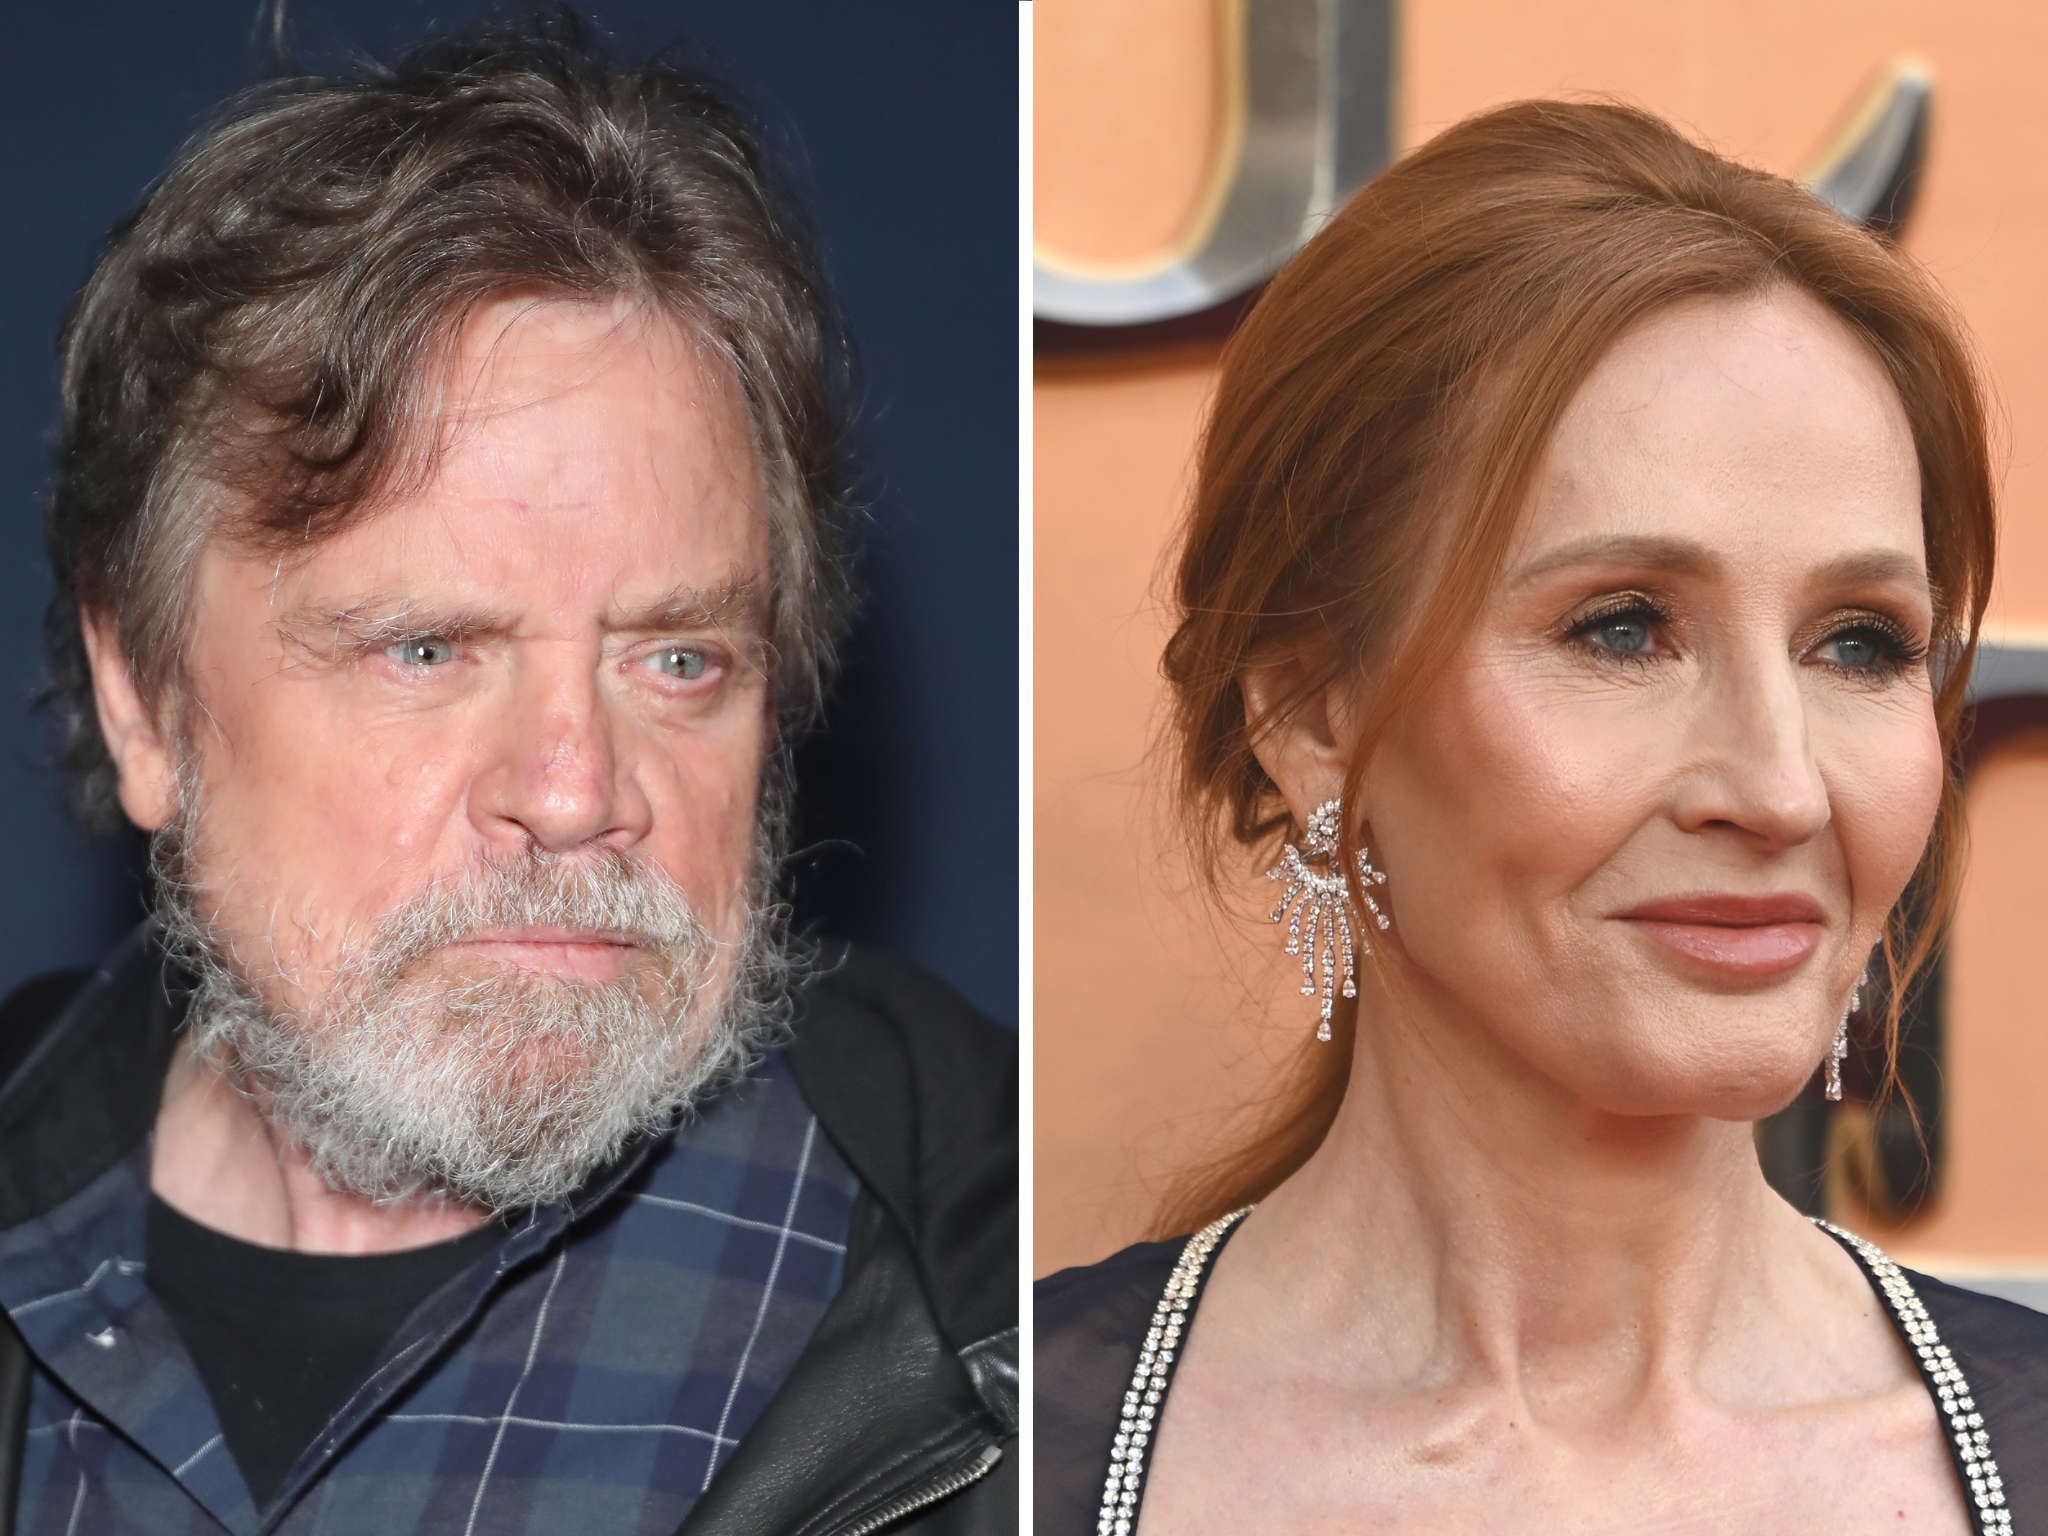 Mark Hamill explains why he ‘liked’ JK Rowling’s ‘transphobic’ tweet following criticism